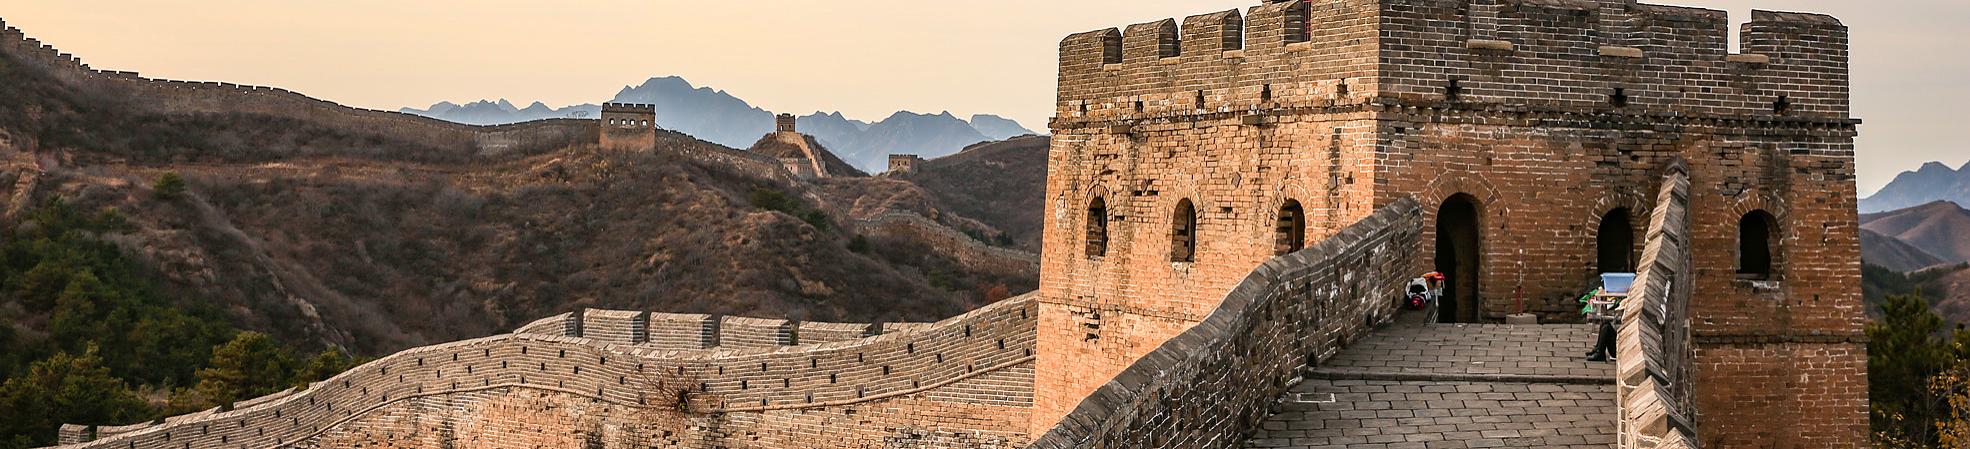 10 Unexpected Fun Facts About the Great Wall of China You May Not Know